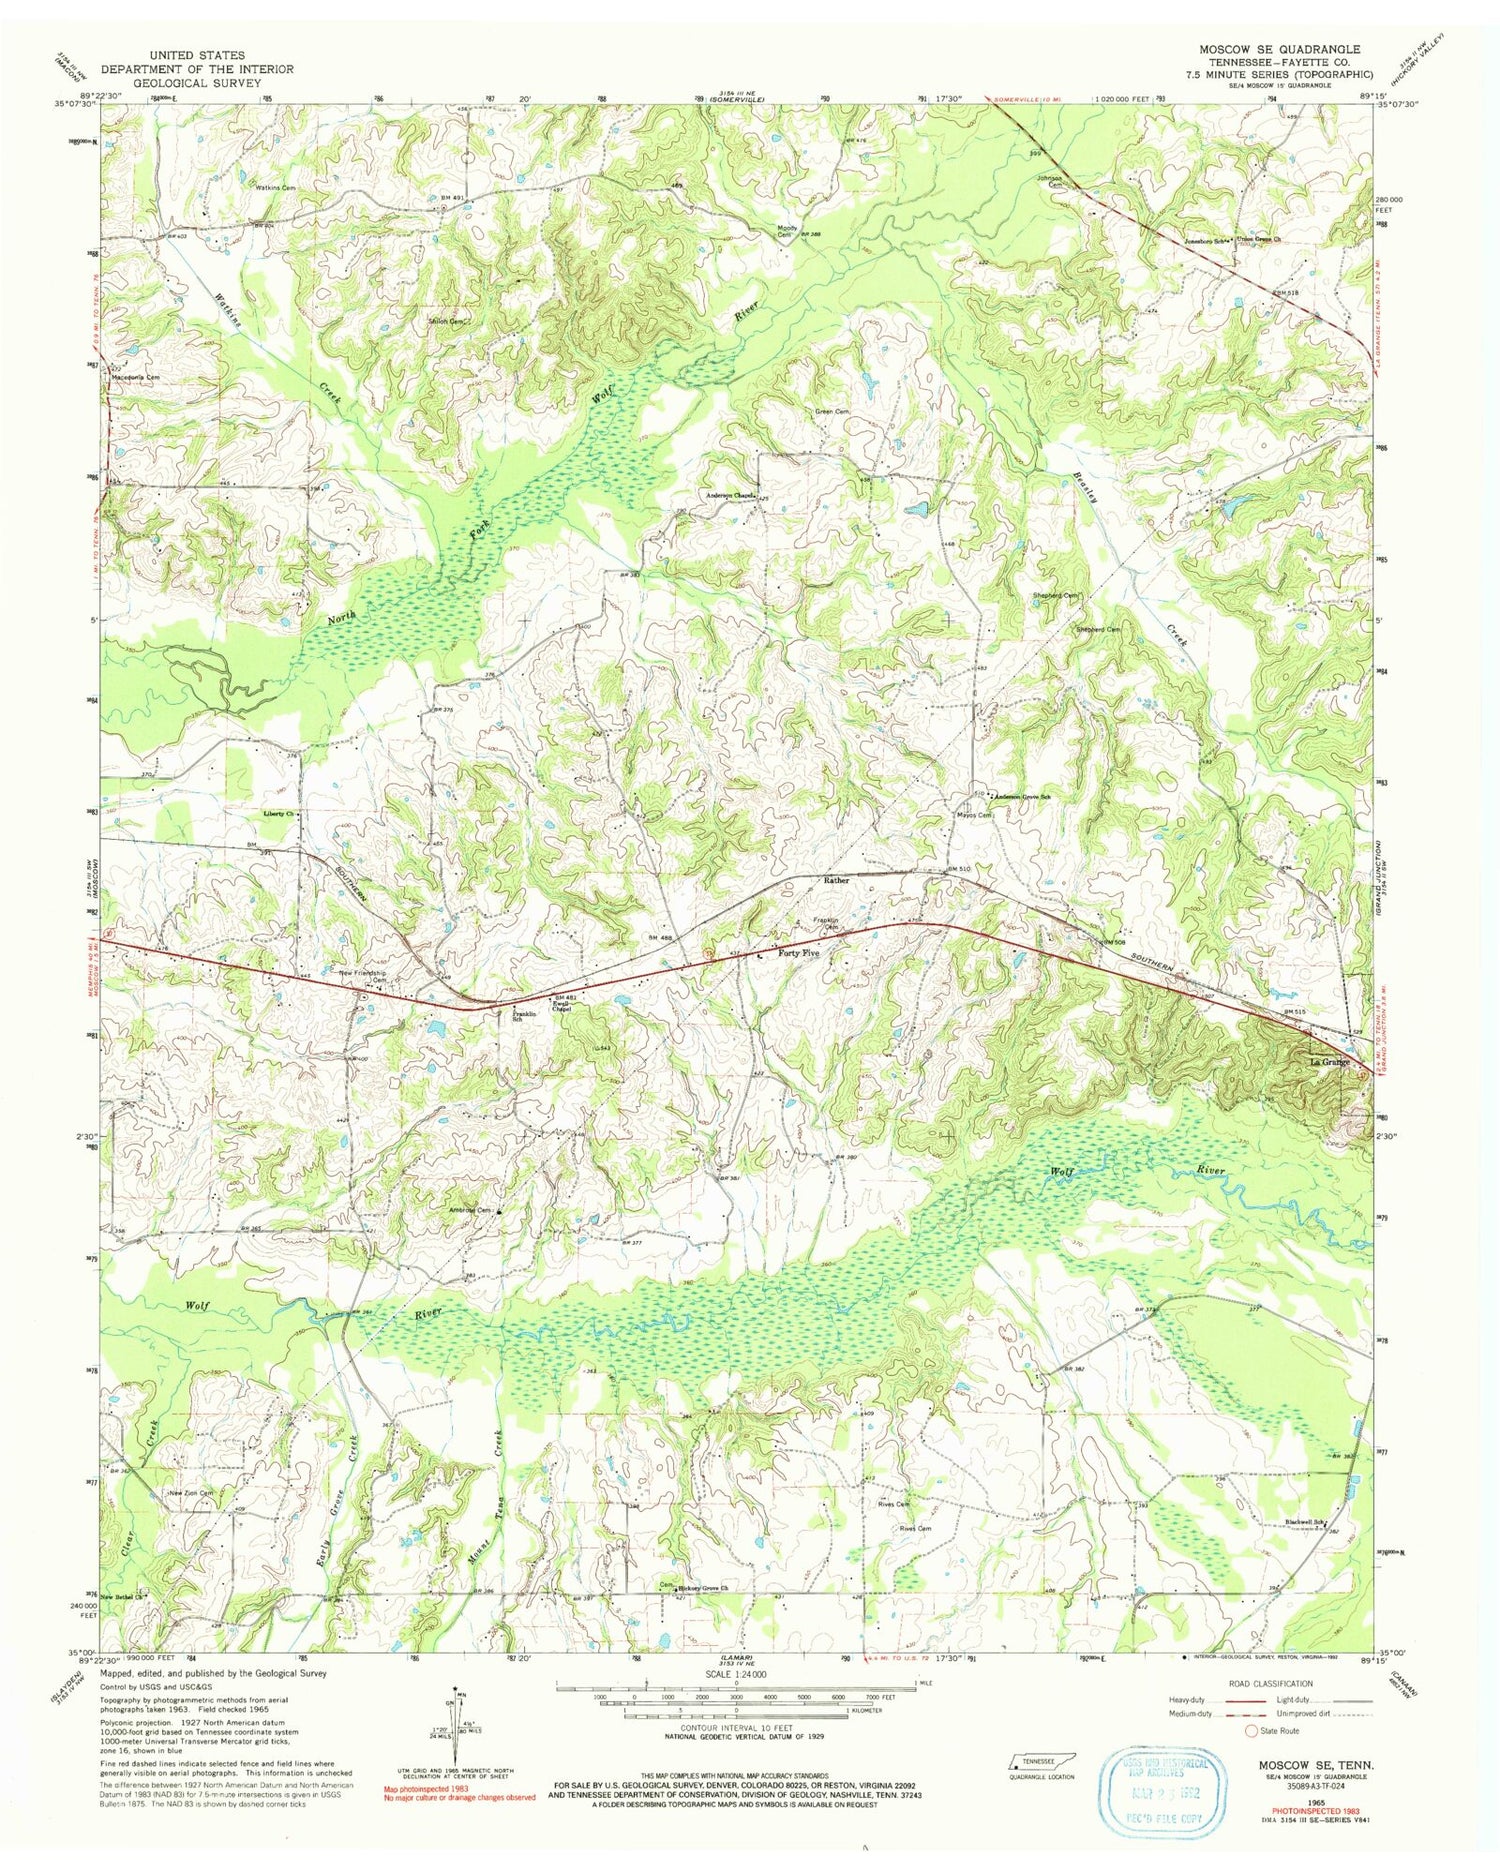 Classic USGS Moscow SE Tennessee 7.5'x7.5' Topo Map Image